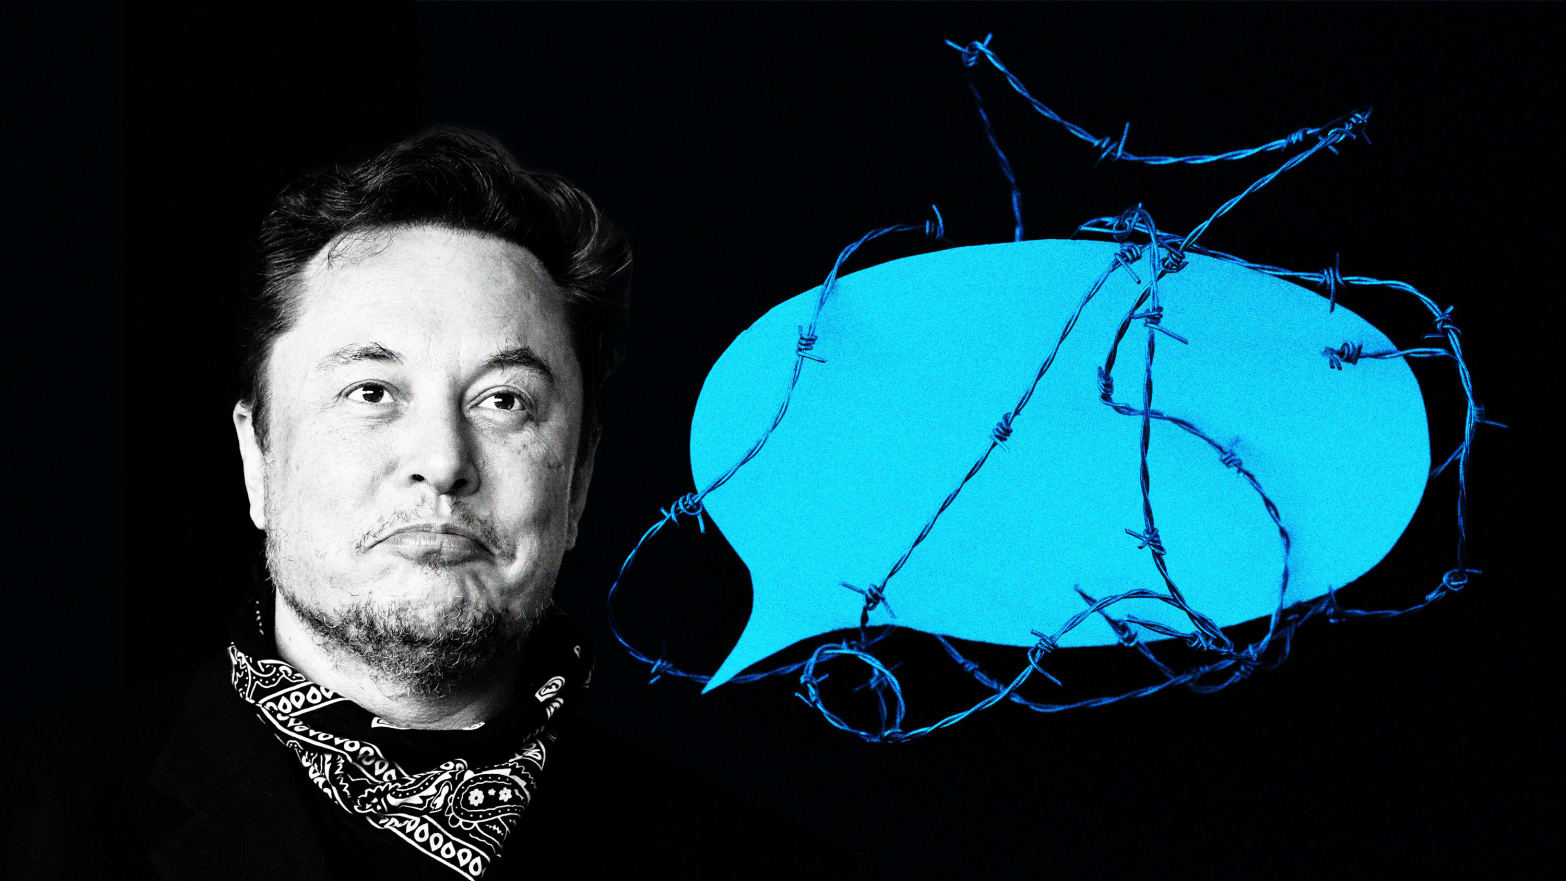 An illustration including a photo of Elon Musk and a Chat Bubble layered in barbed wire